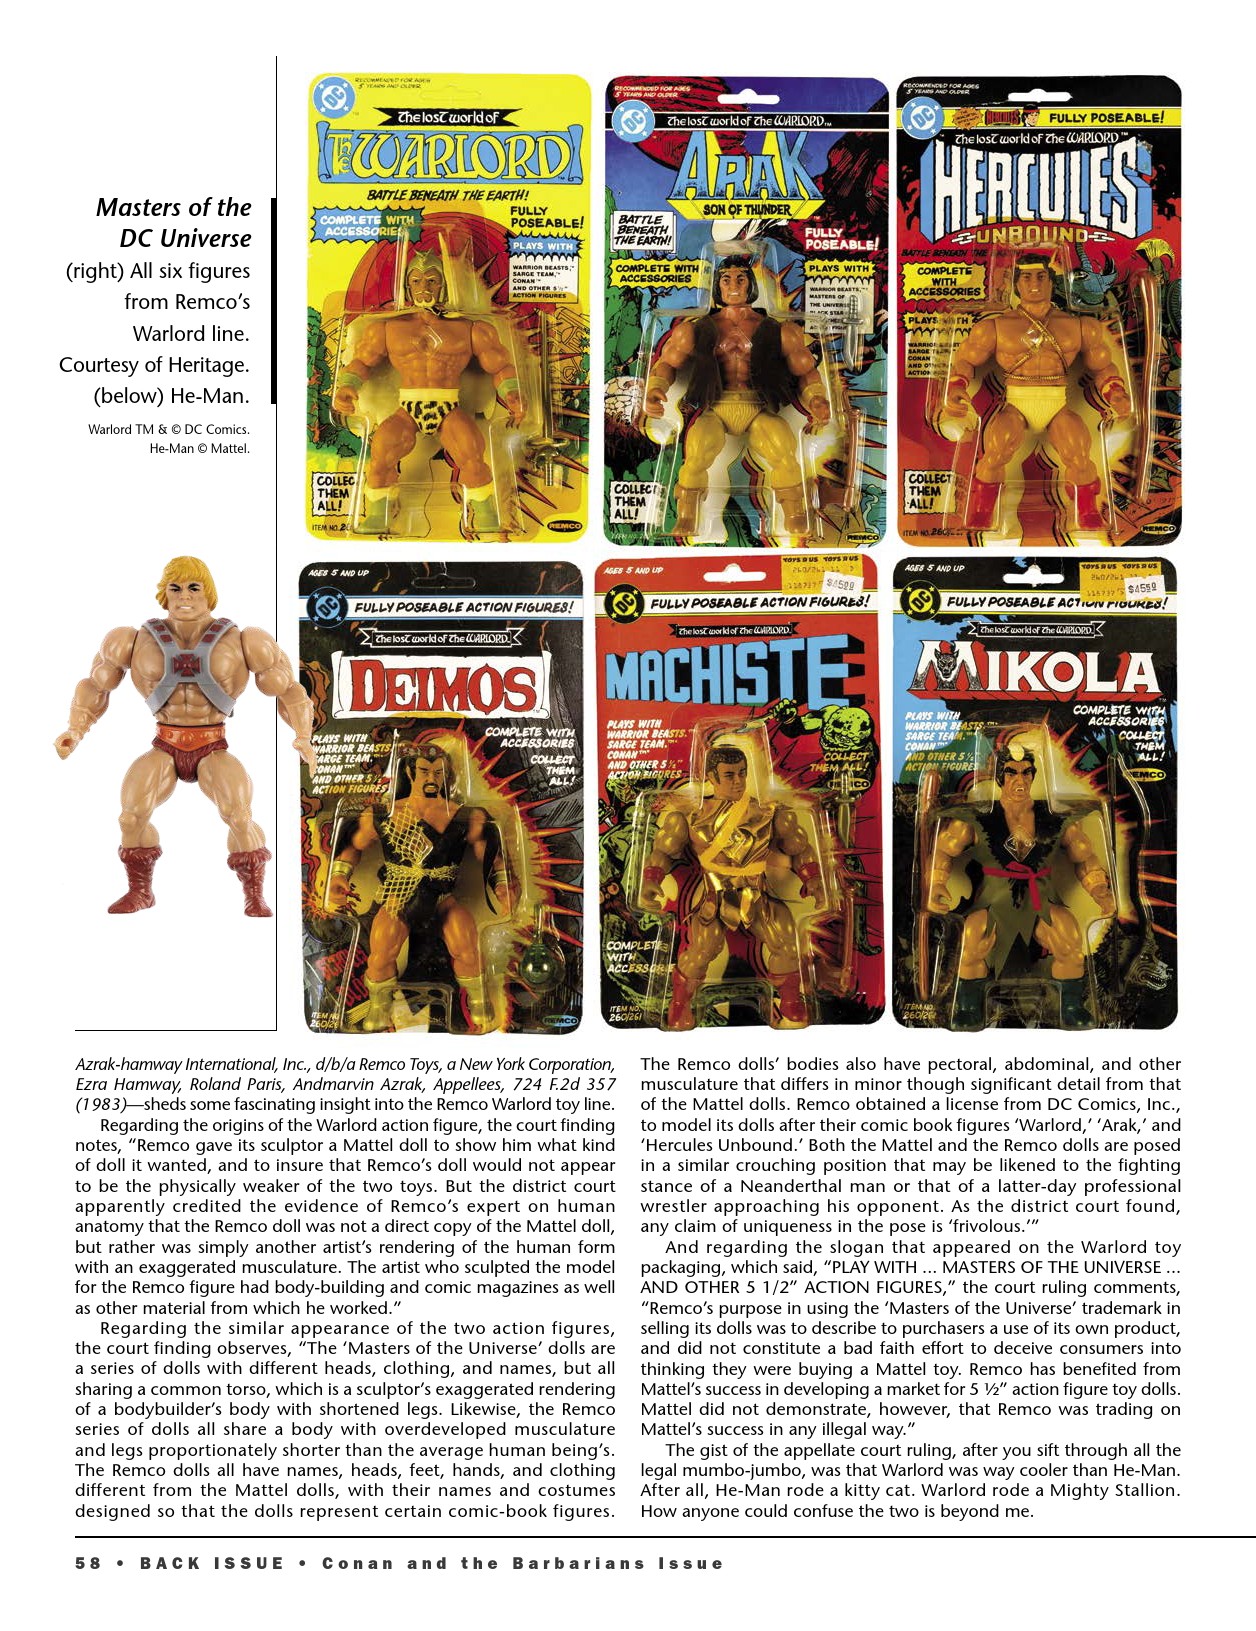 Read online Back Issue comic -  Issue #121 - 60